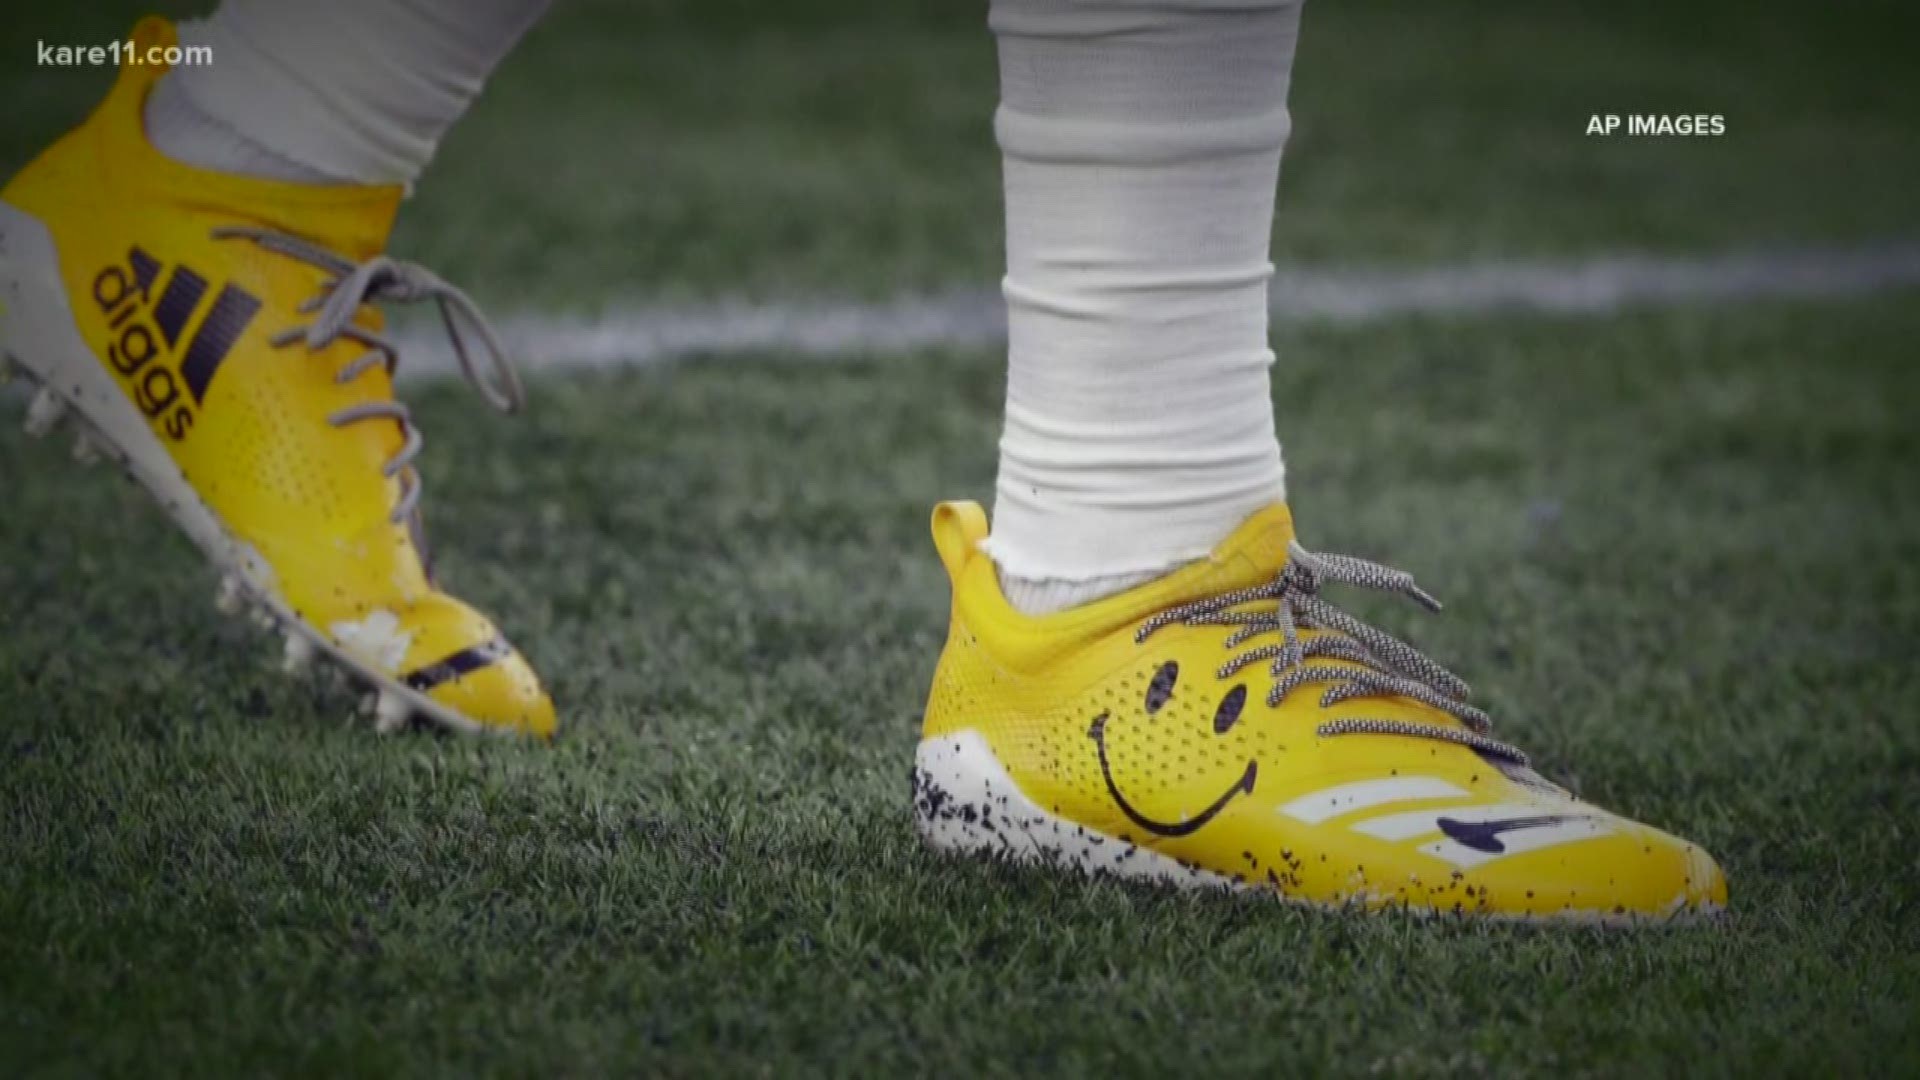 The controversy behind custom cleats in 